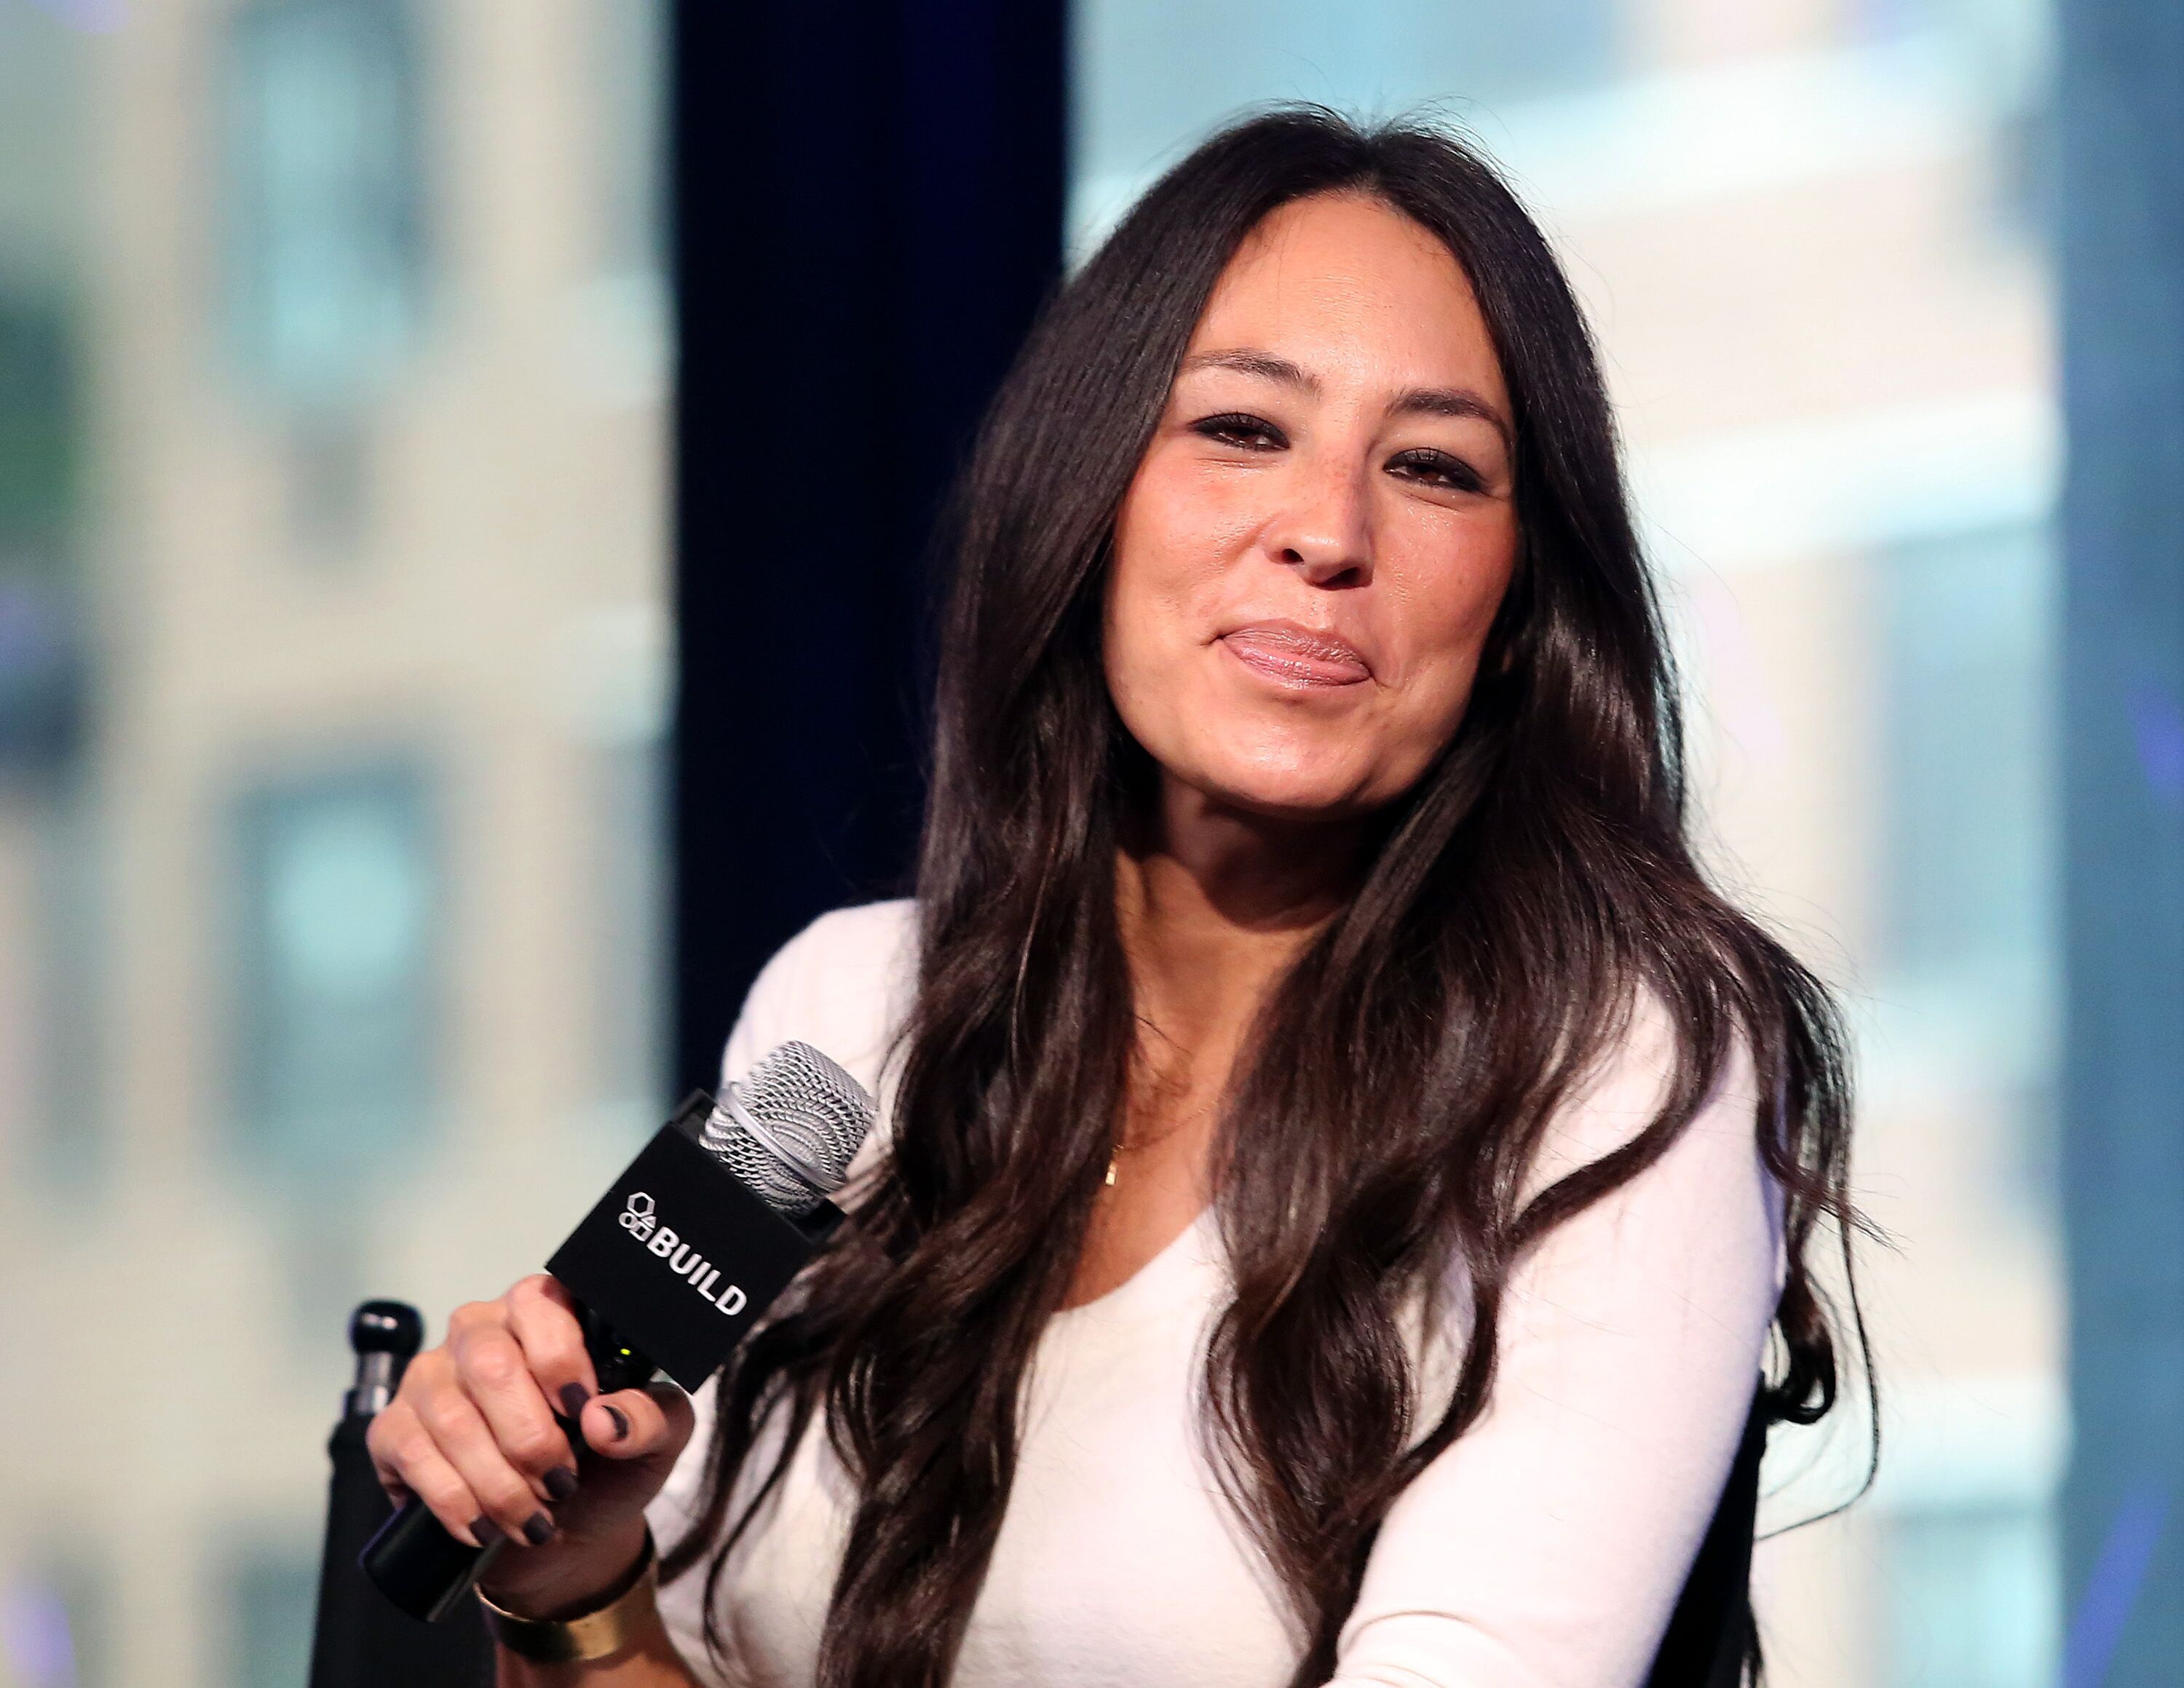 Designer Joanna Gaines appear to promote "The Magnolia Story" during the AOL BUILD Series at AOL HQ on October 19, 2016. | Photo: Getty Images